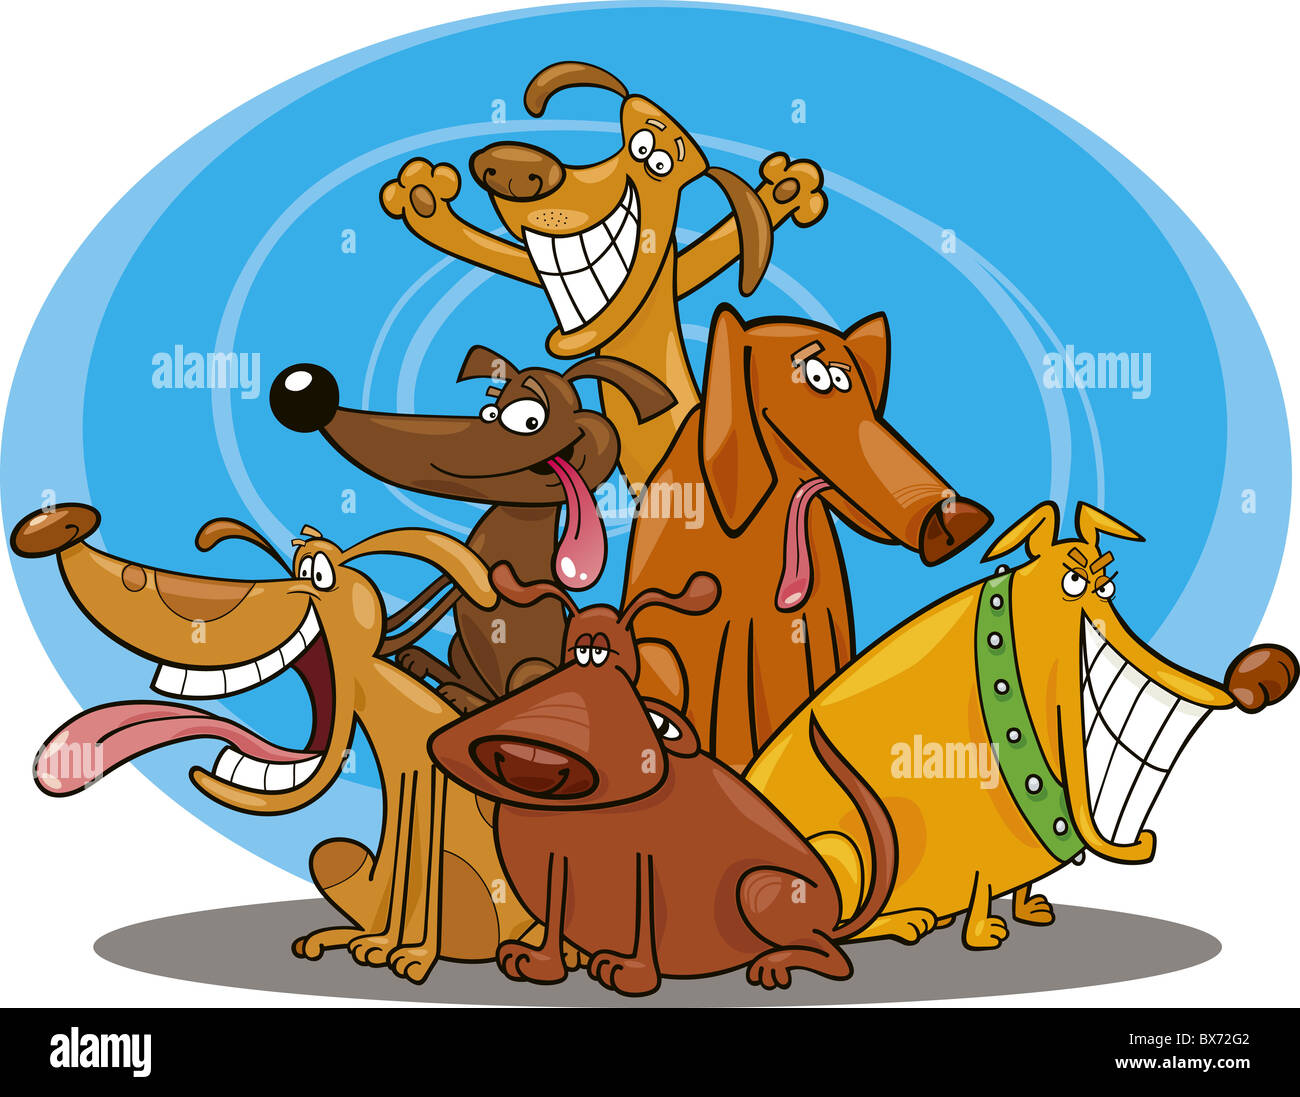 cartoon illustration of funny dogs group Stock Photo